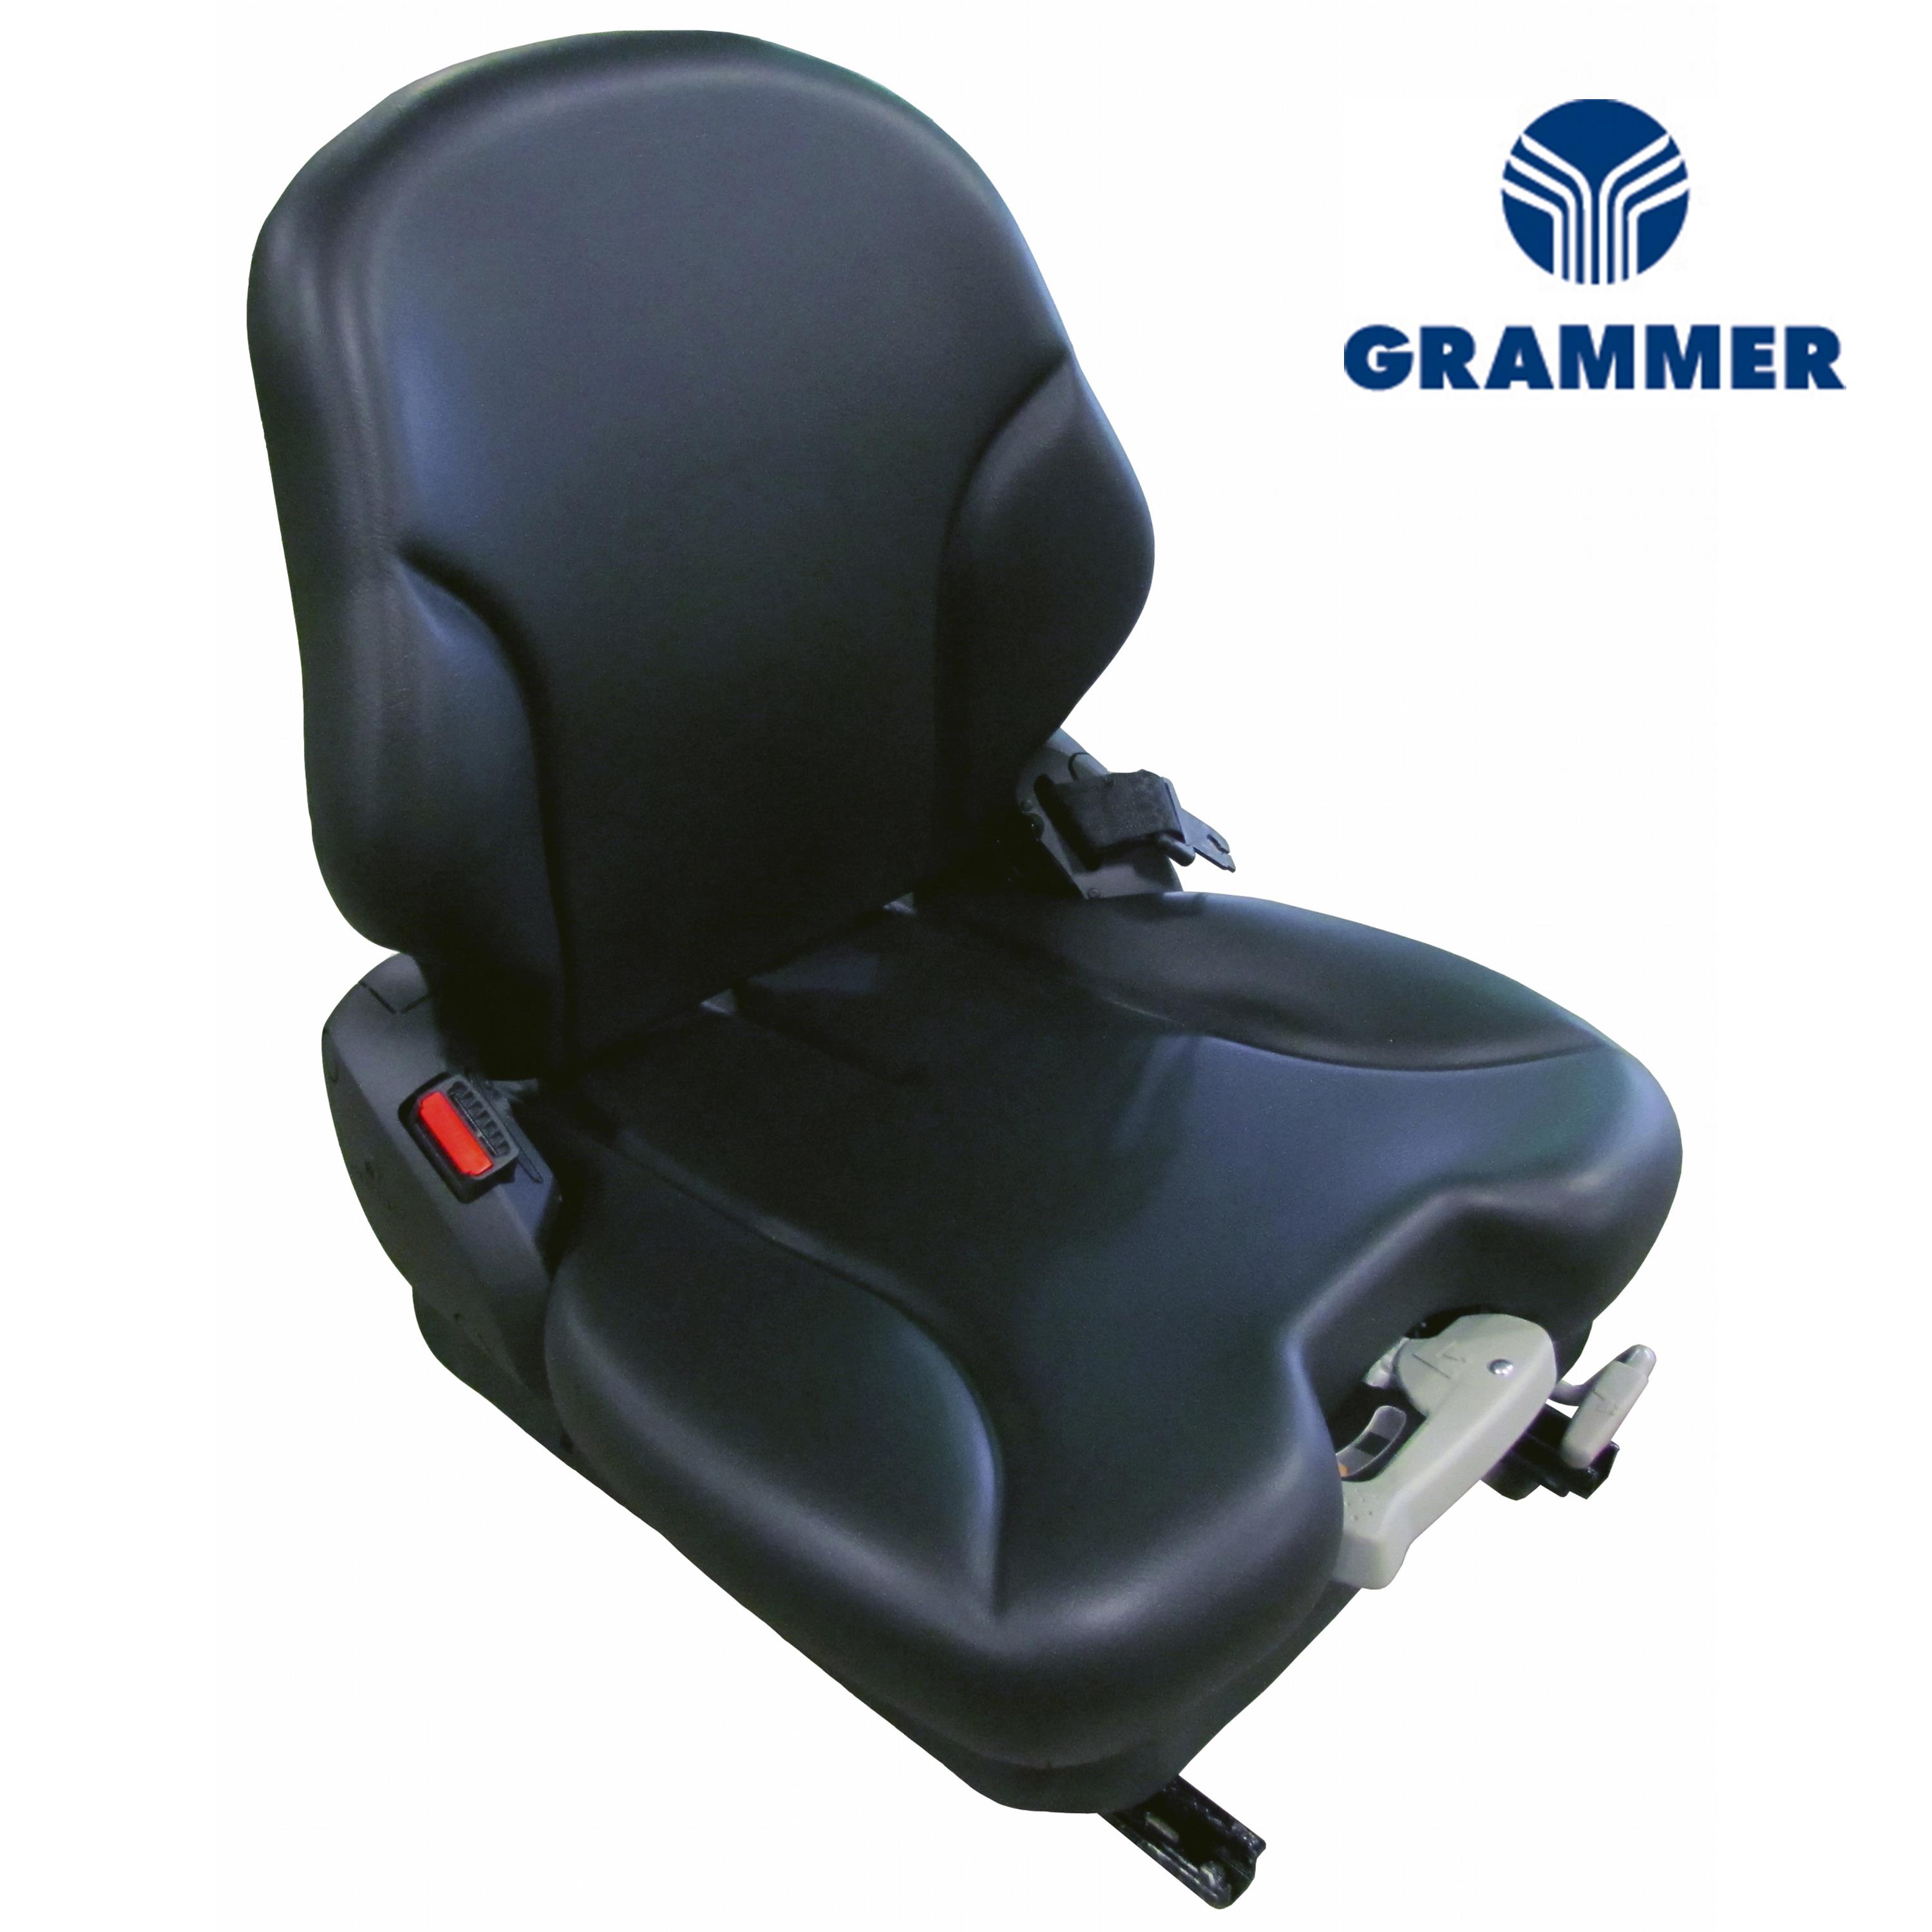 Grammer Low Back Seat, Black Vinyl with Mechanical Suspension